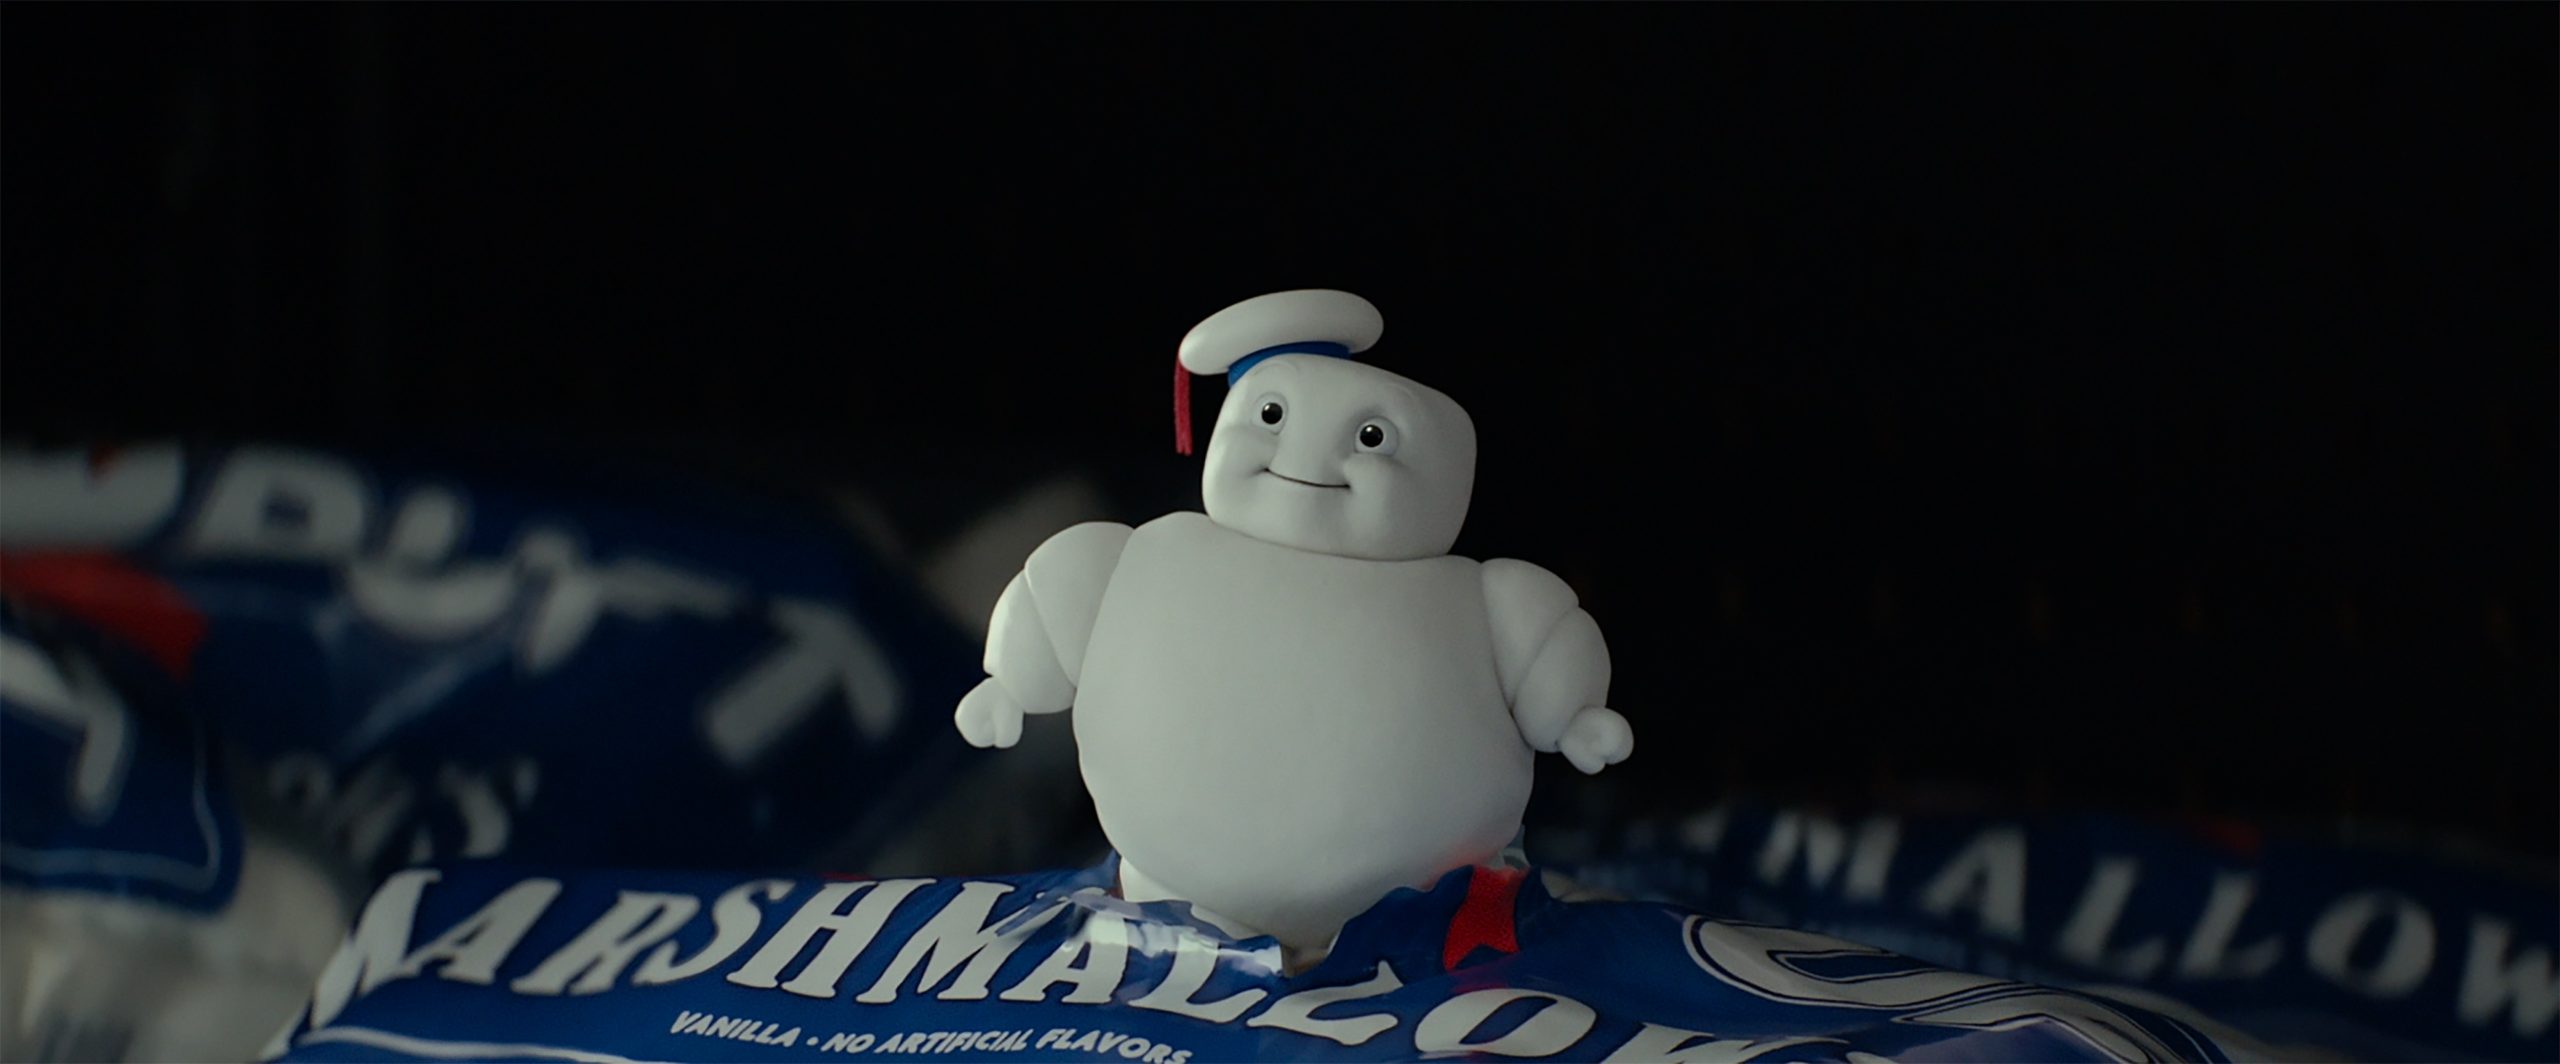 A delightfully rotund little marshmellow man, the stay-puft marshmellow man, looks ponderously up at the camera